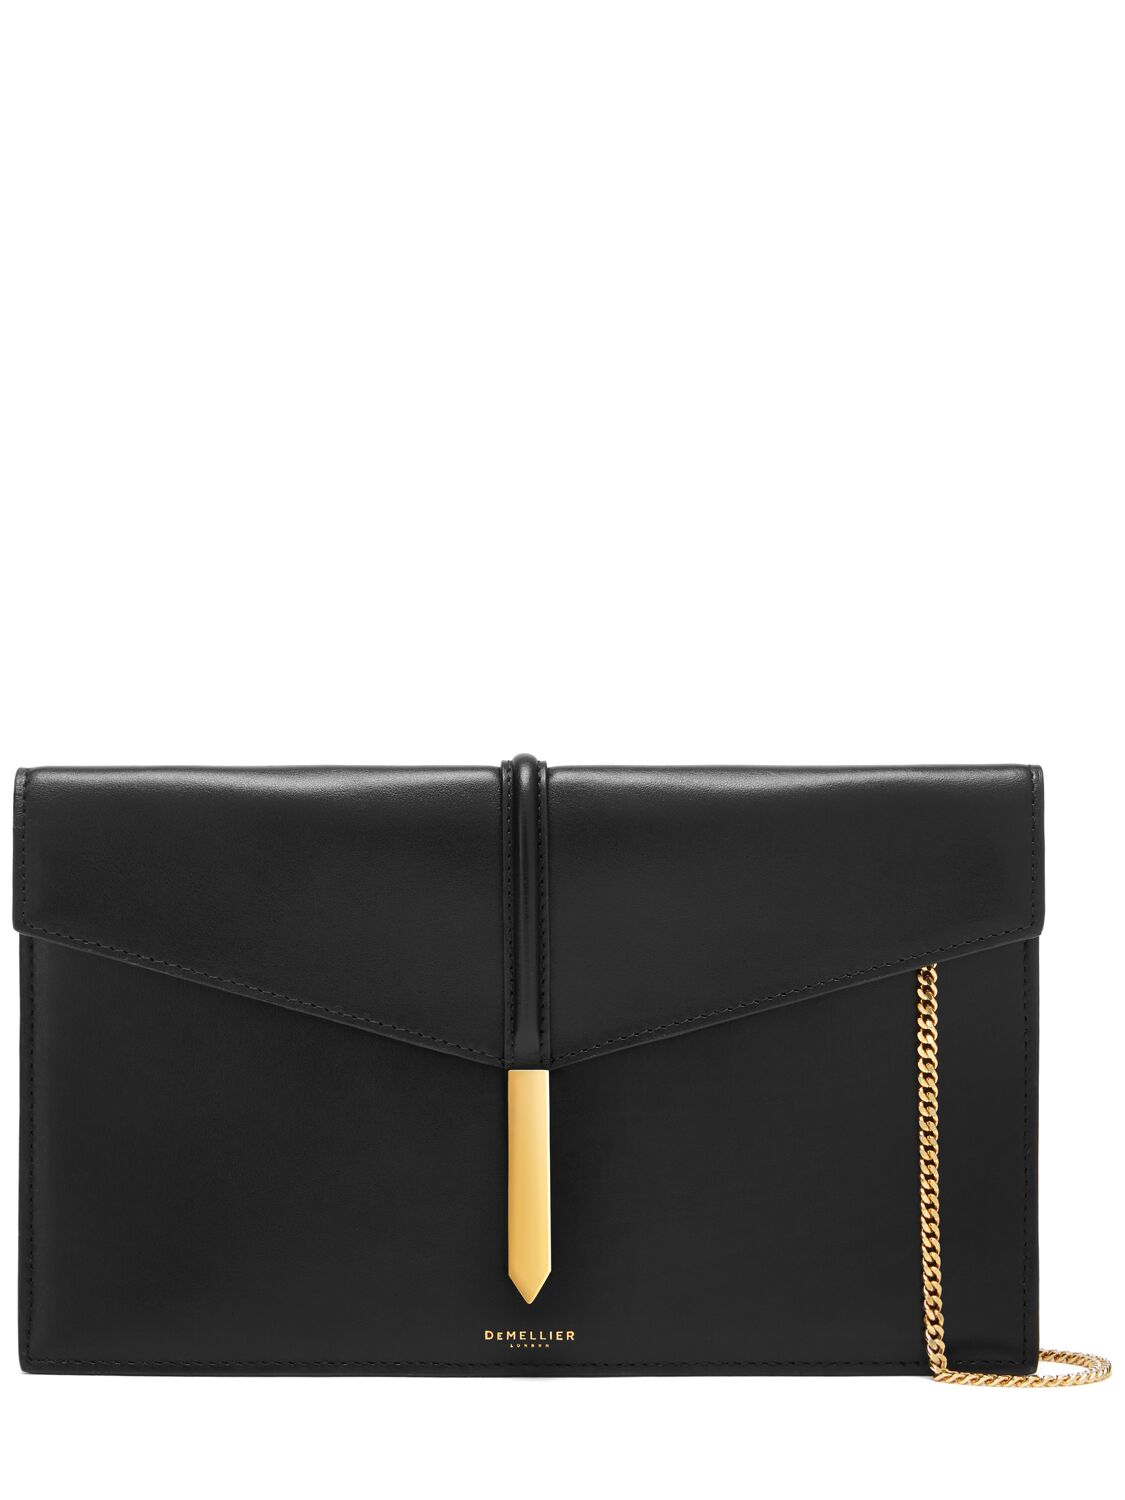 Demellier Tokyo Smooth Leather Clutch In Black